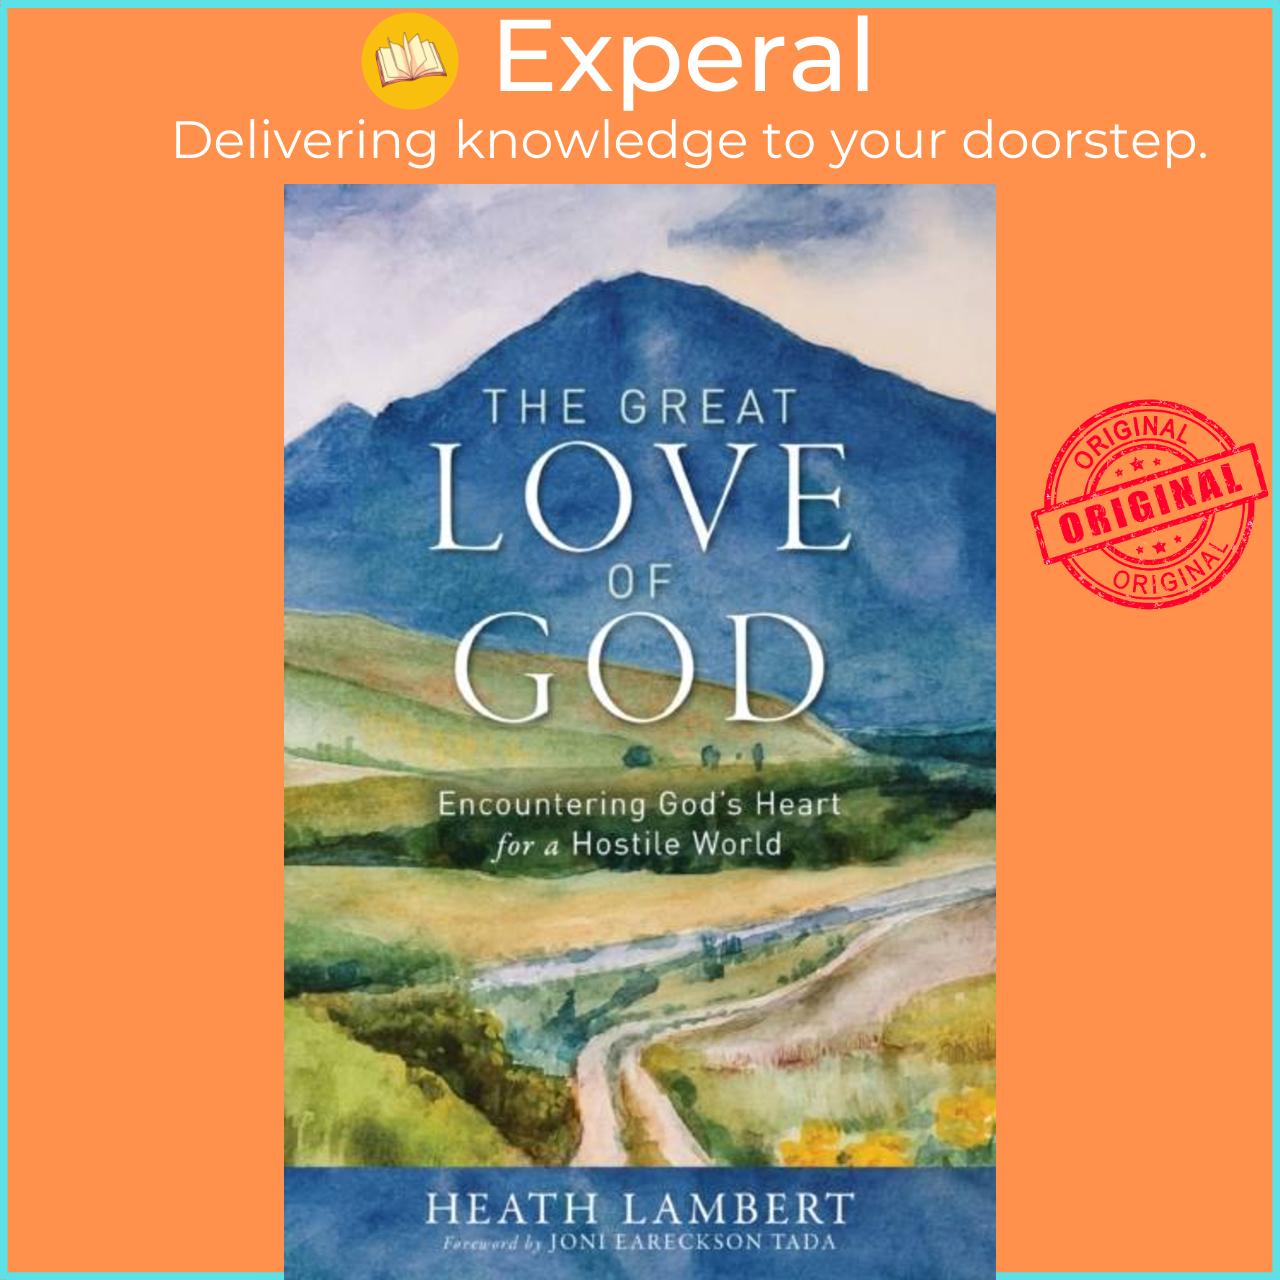 Sách - The Great Love of God - Encountering God's Heart for a Hostile World by Heath Lambert (UK edition, paperback)